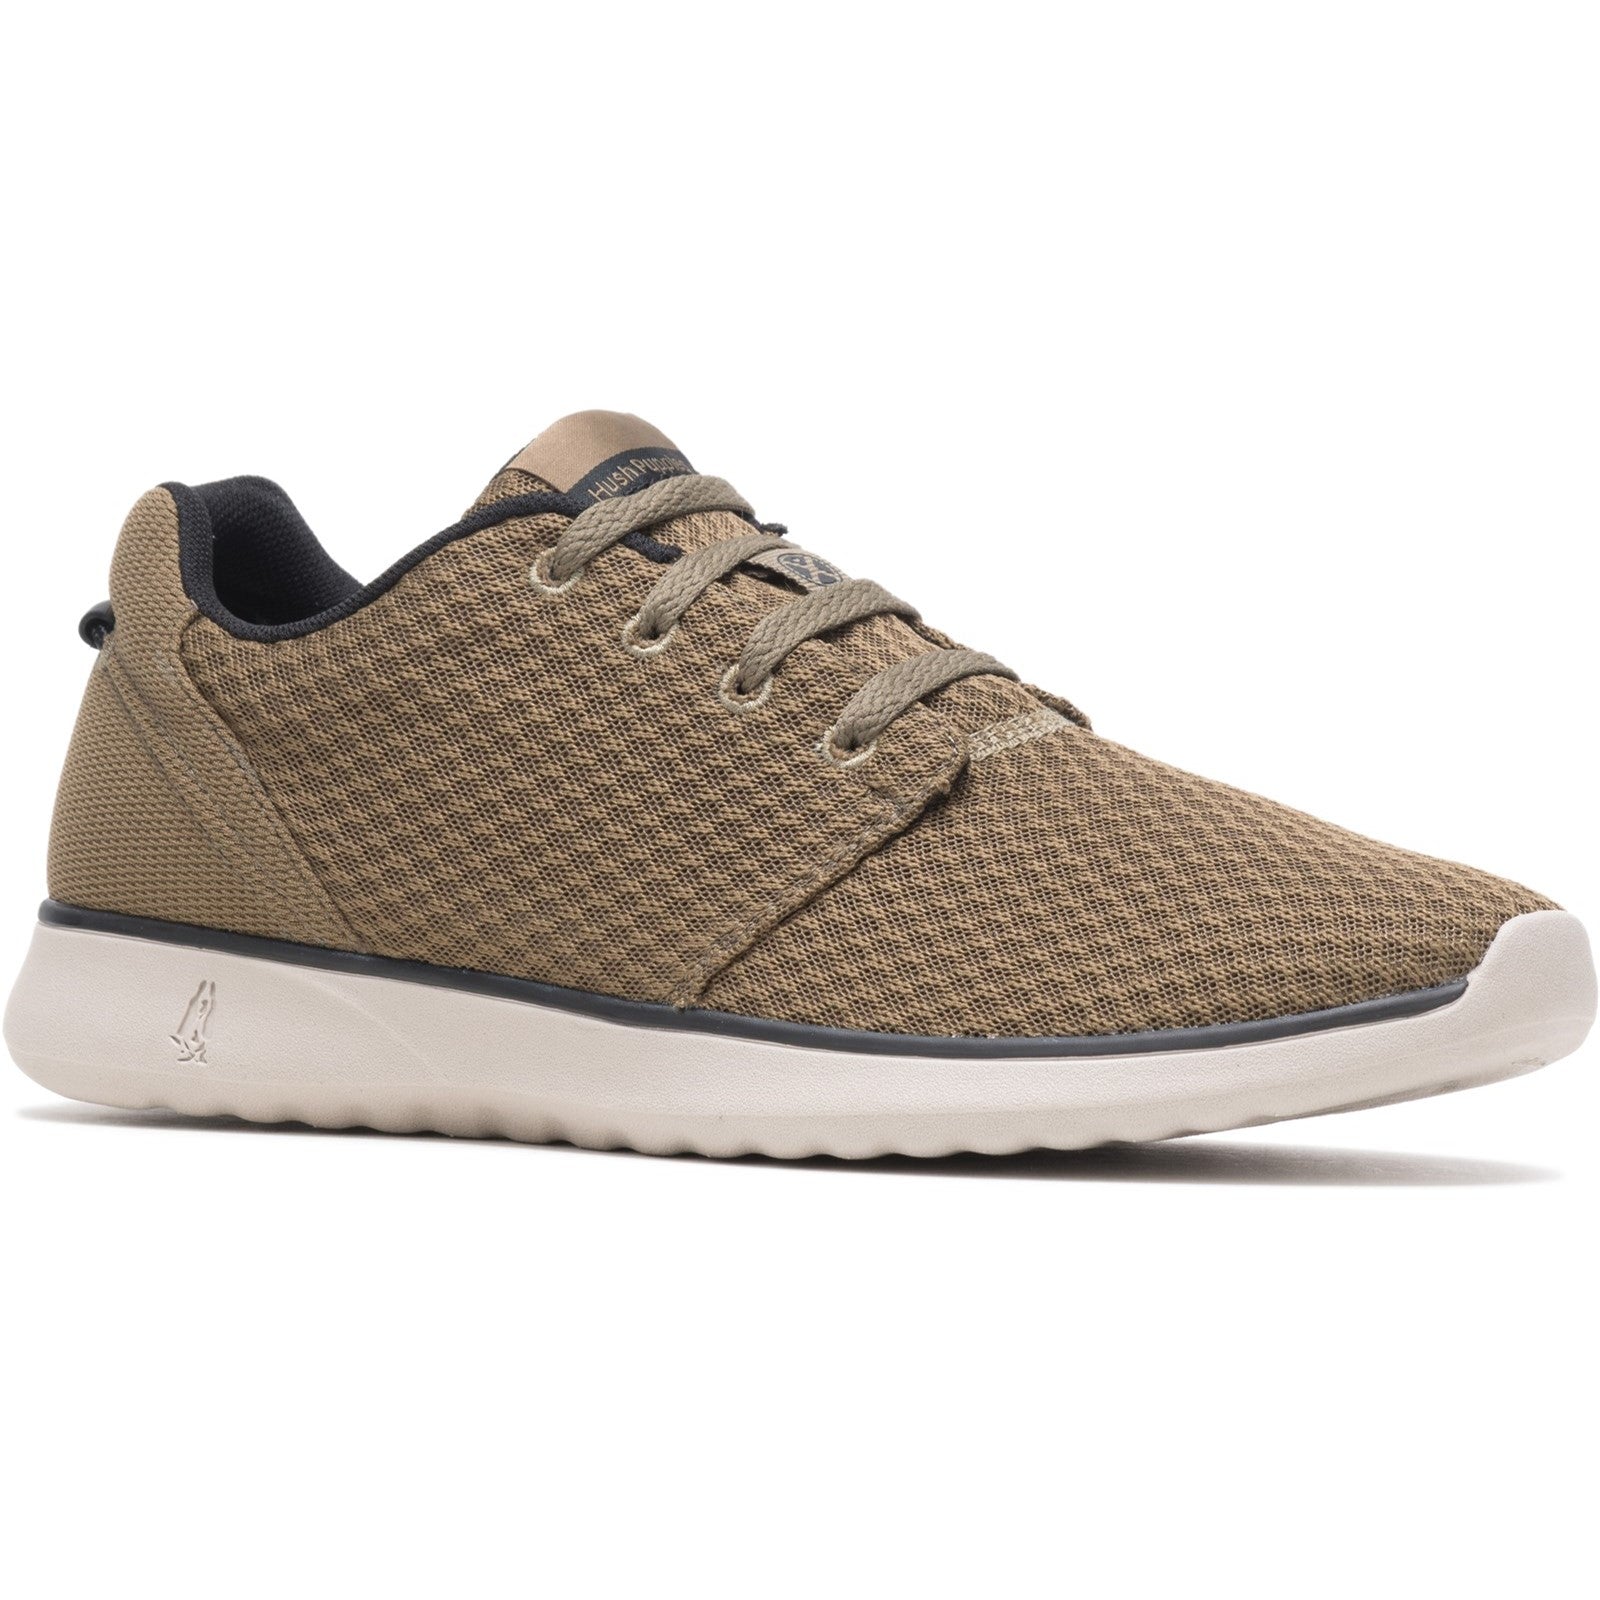 Mens Sports Olive Hush Puppies Good Shoe Lace